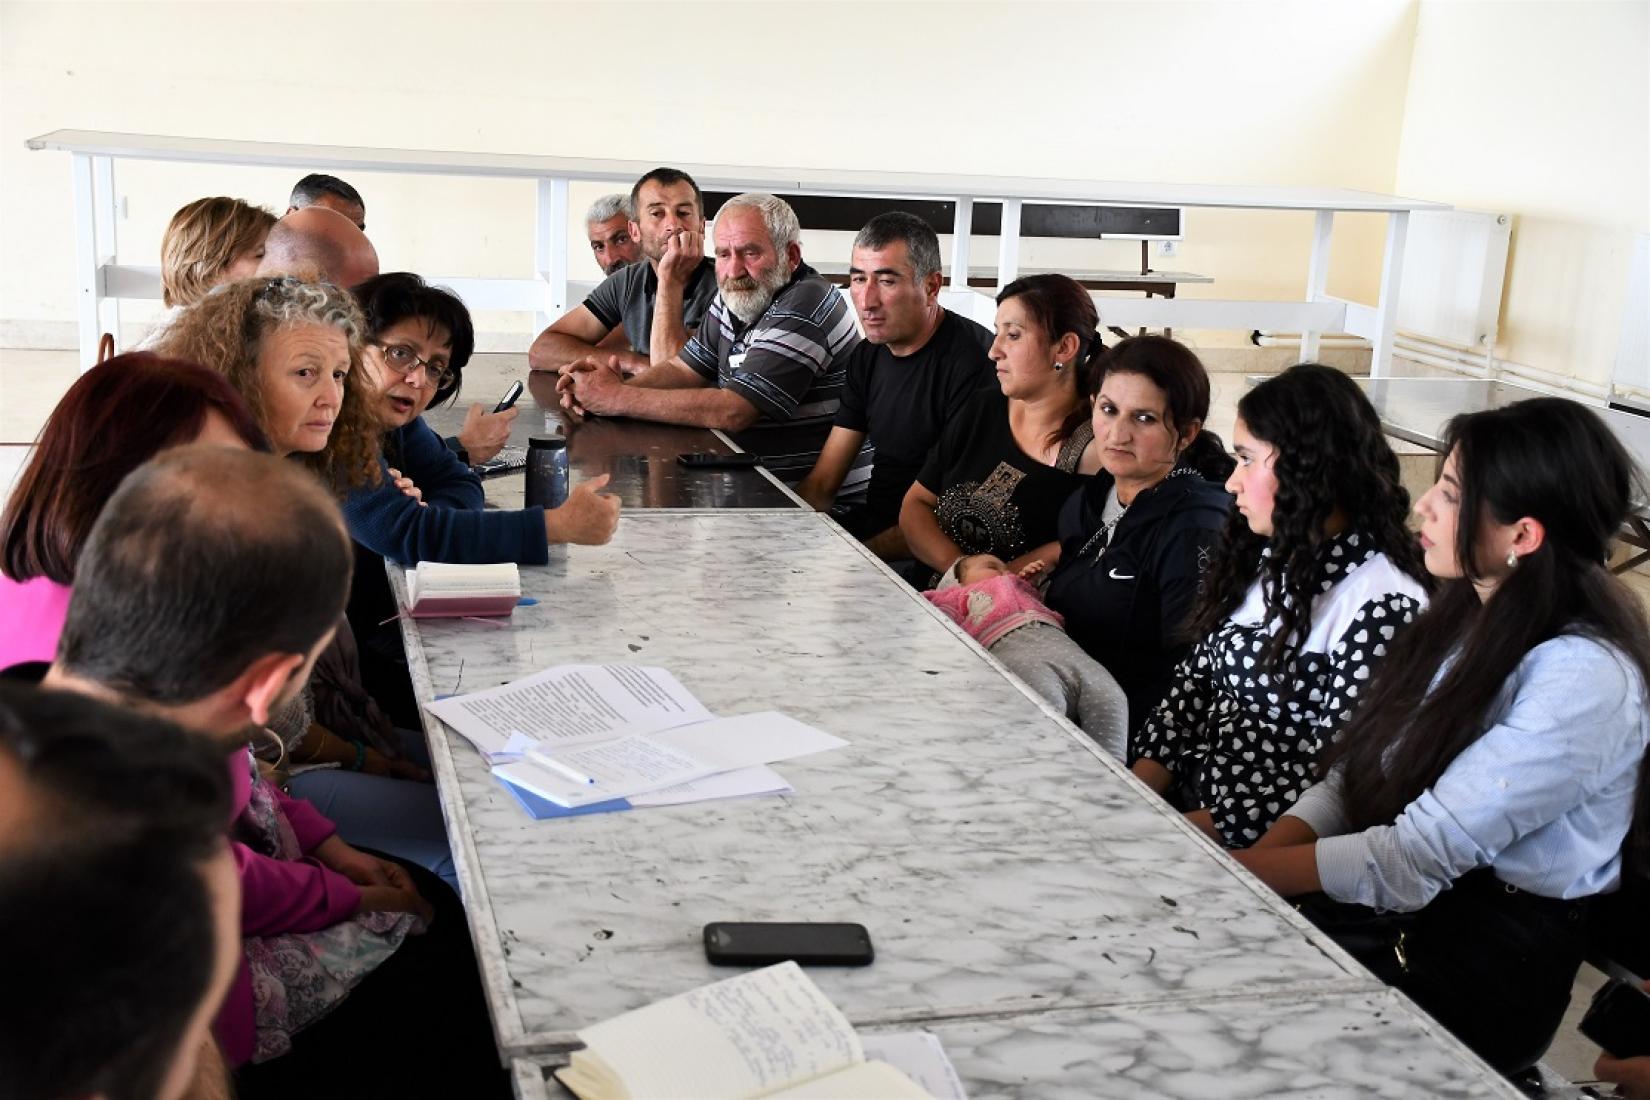 The Acting Resident Coordinator of the UN in Armenia, Lila Pieters Yahia met with the project beneficiaries.